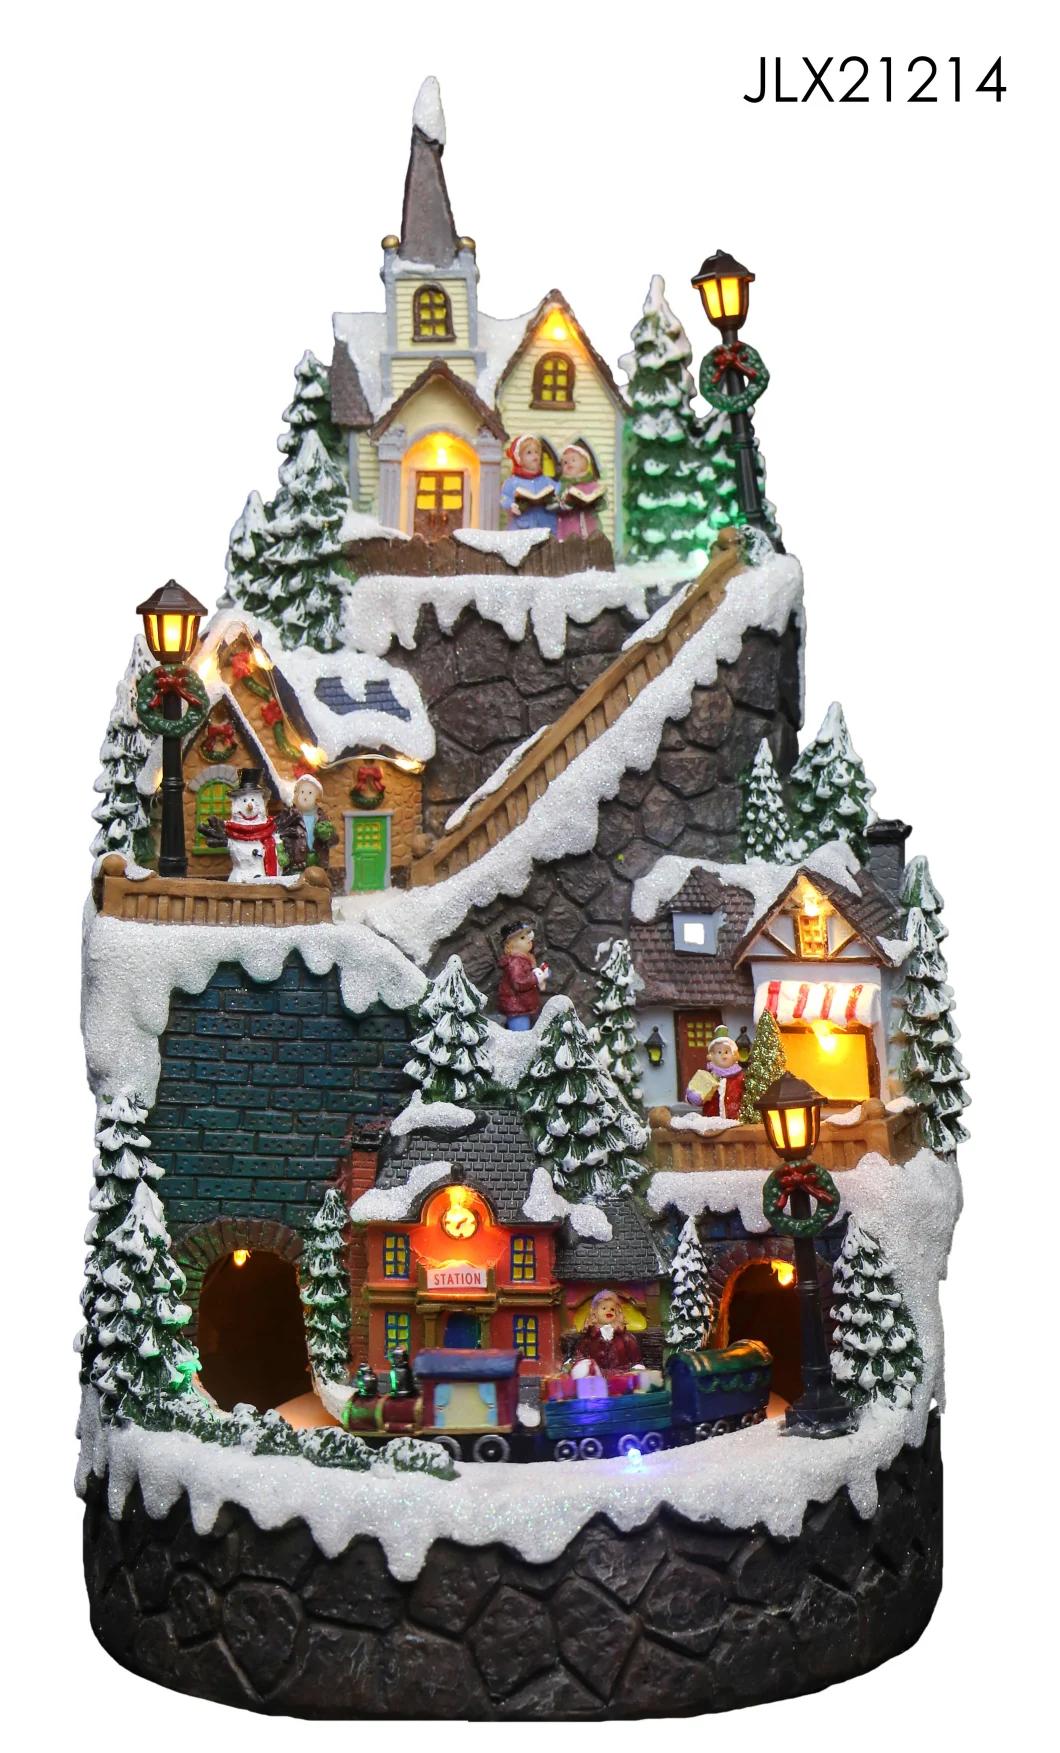 New Design Christmas Village House with LED Lights with Water Wheel Spin and Three Person Roller Skates with Music